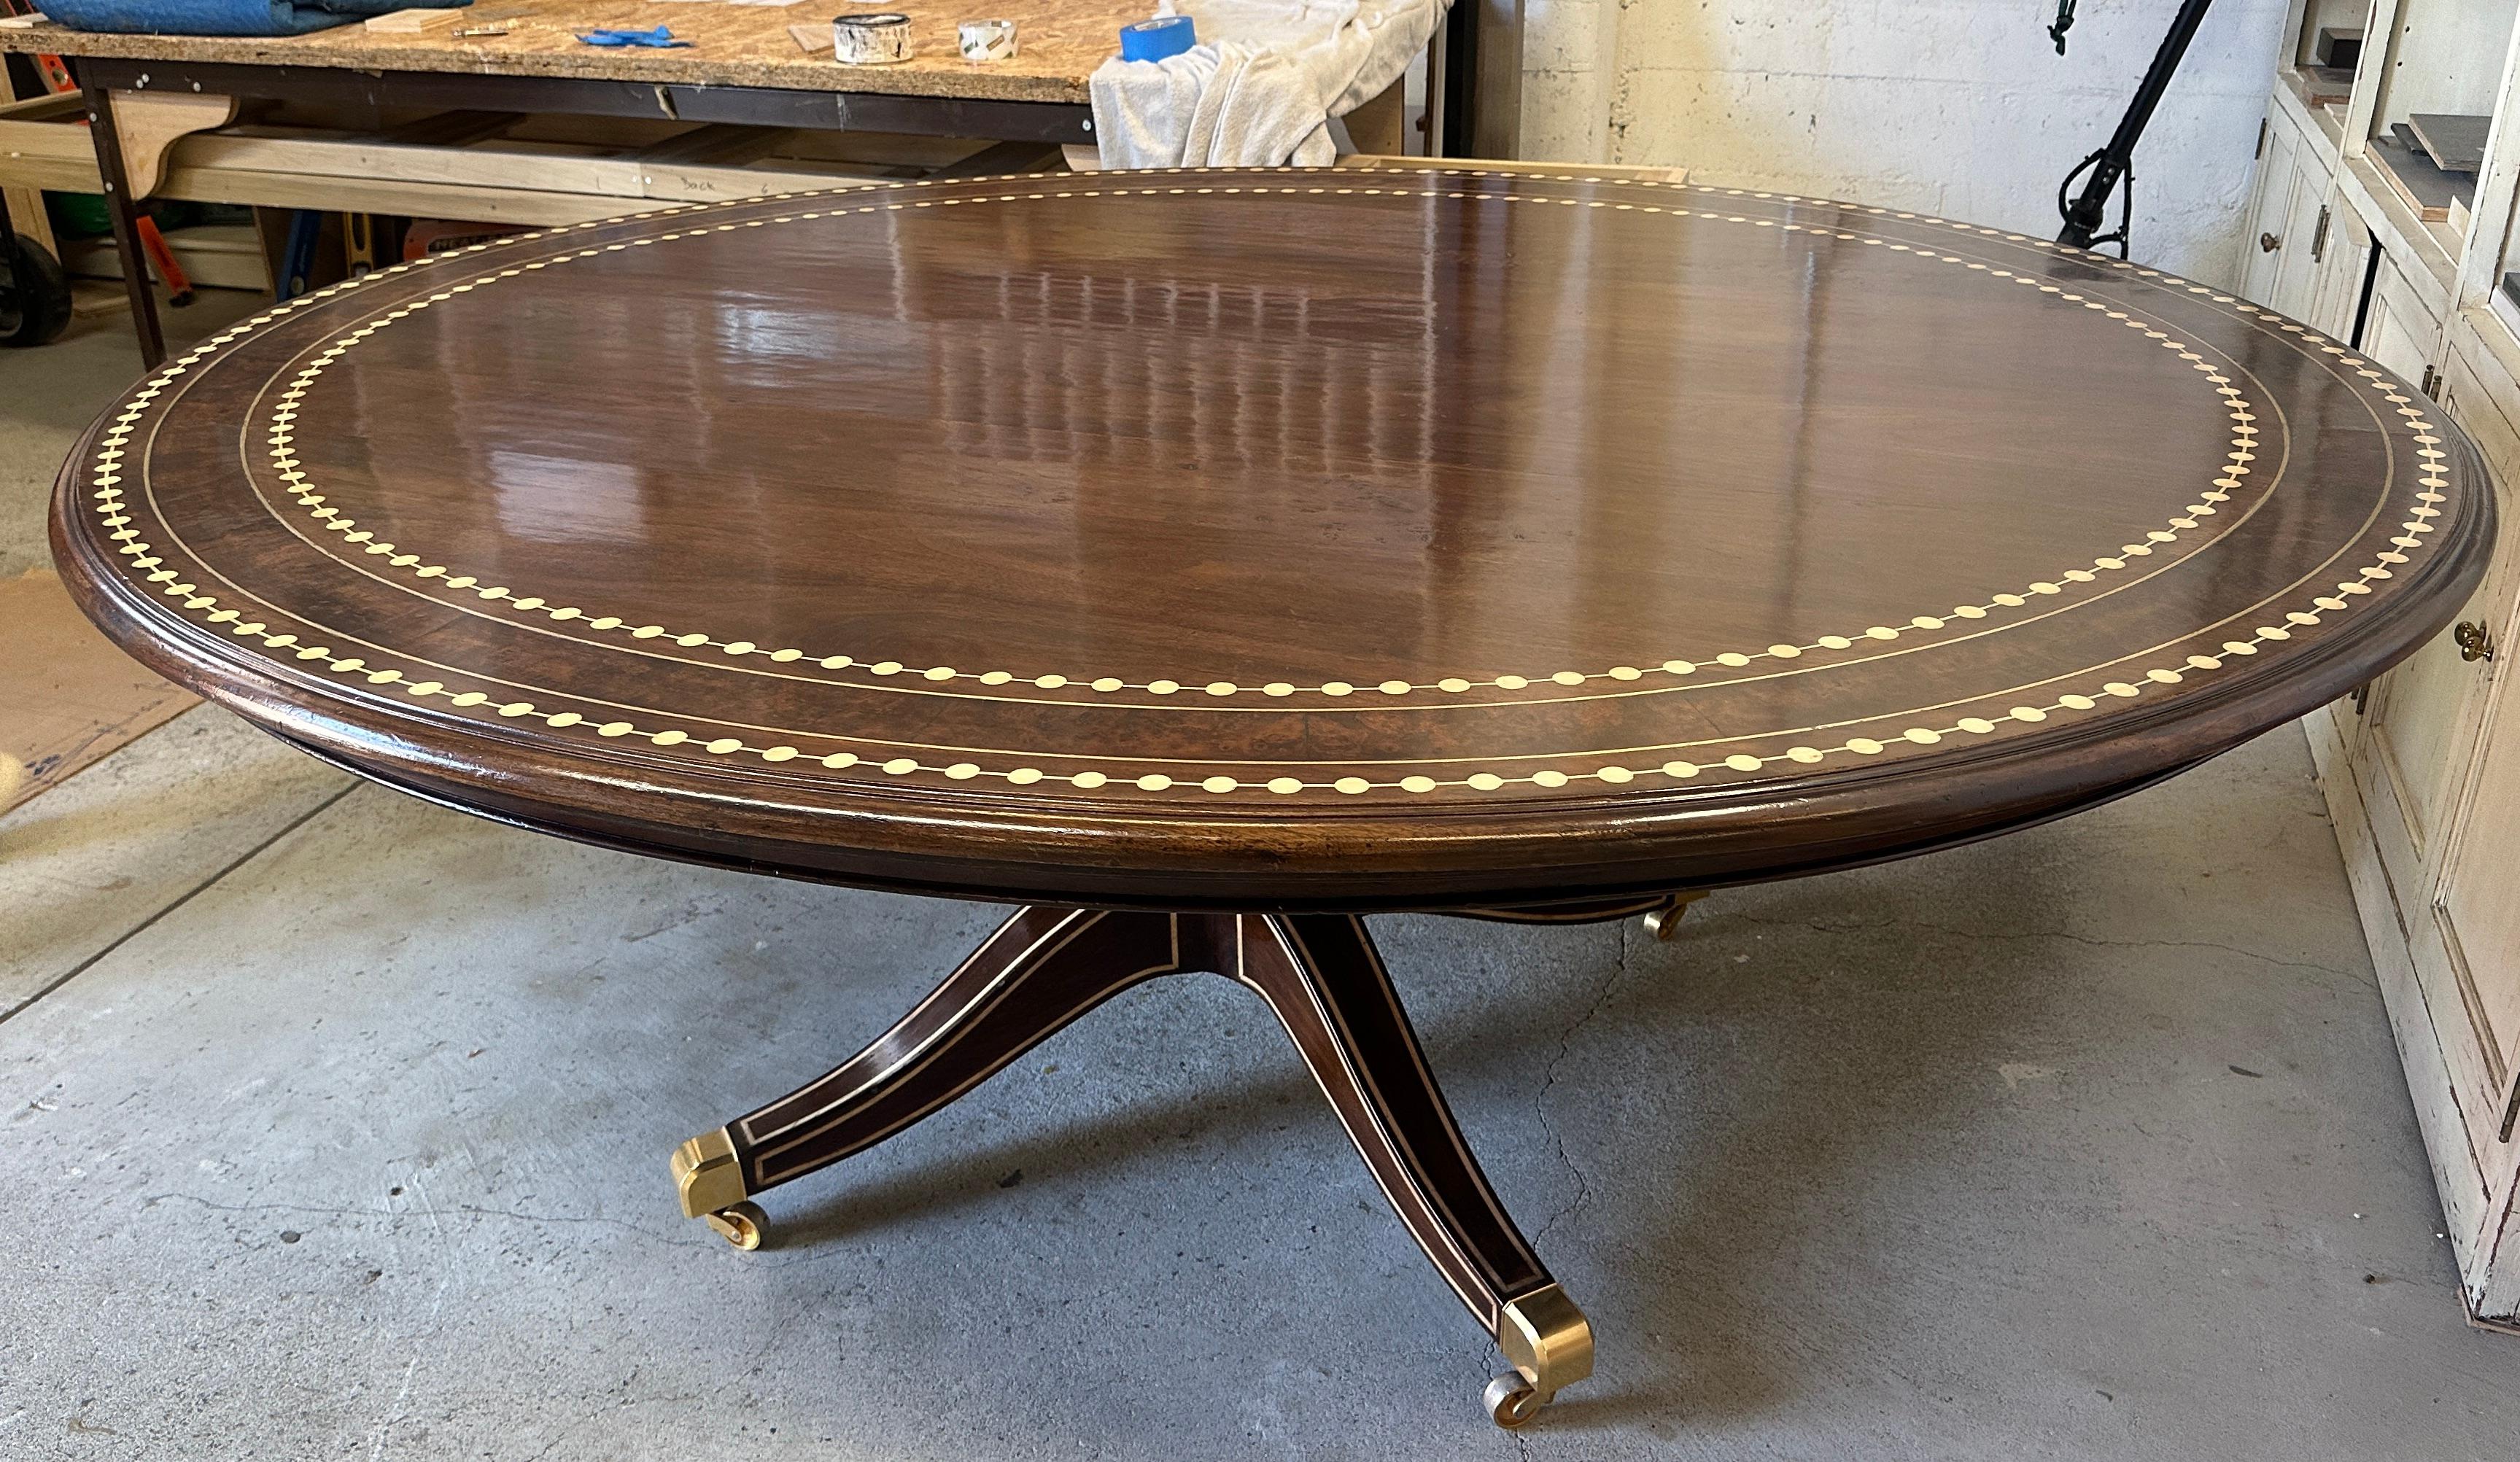 This table is a authentic reproduction of a Dining Table owned by
Ann Getty. Ann Getty House offered certain reproductions to the public
via high end showrooms. The Table is fabricated in oak and walnut exactly
as the original one. The original sold